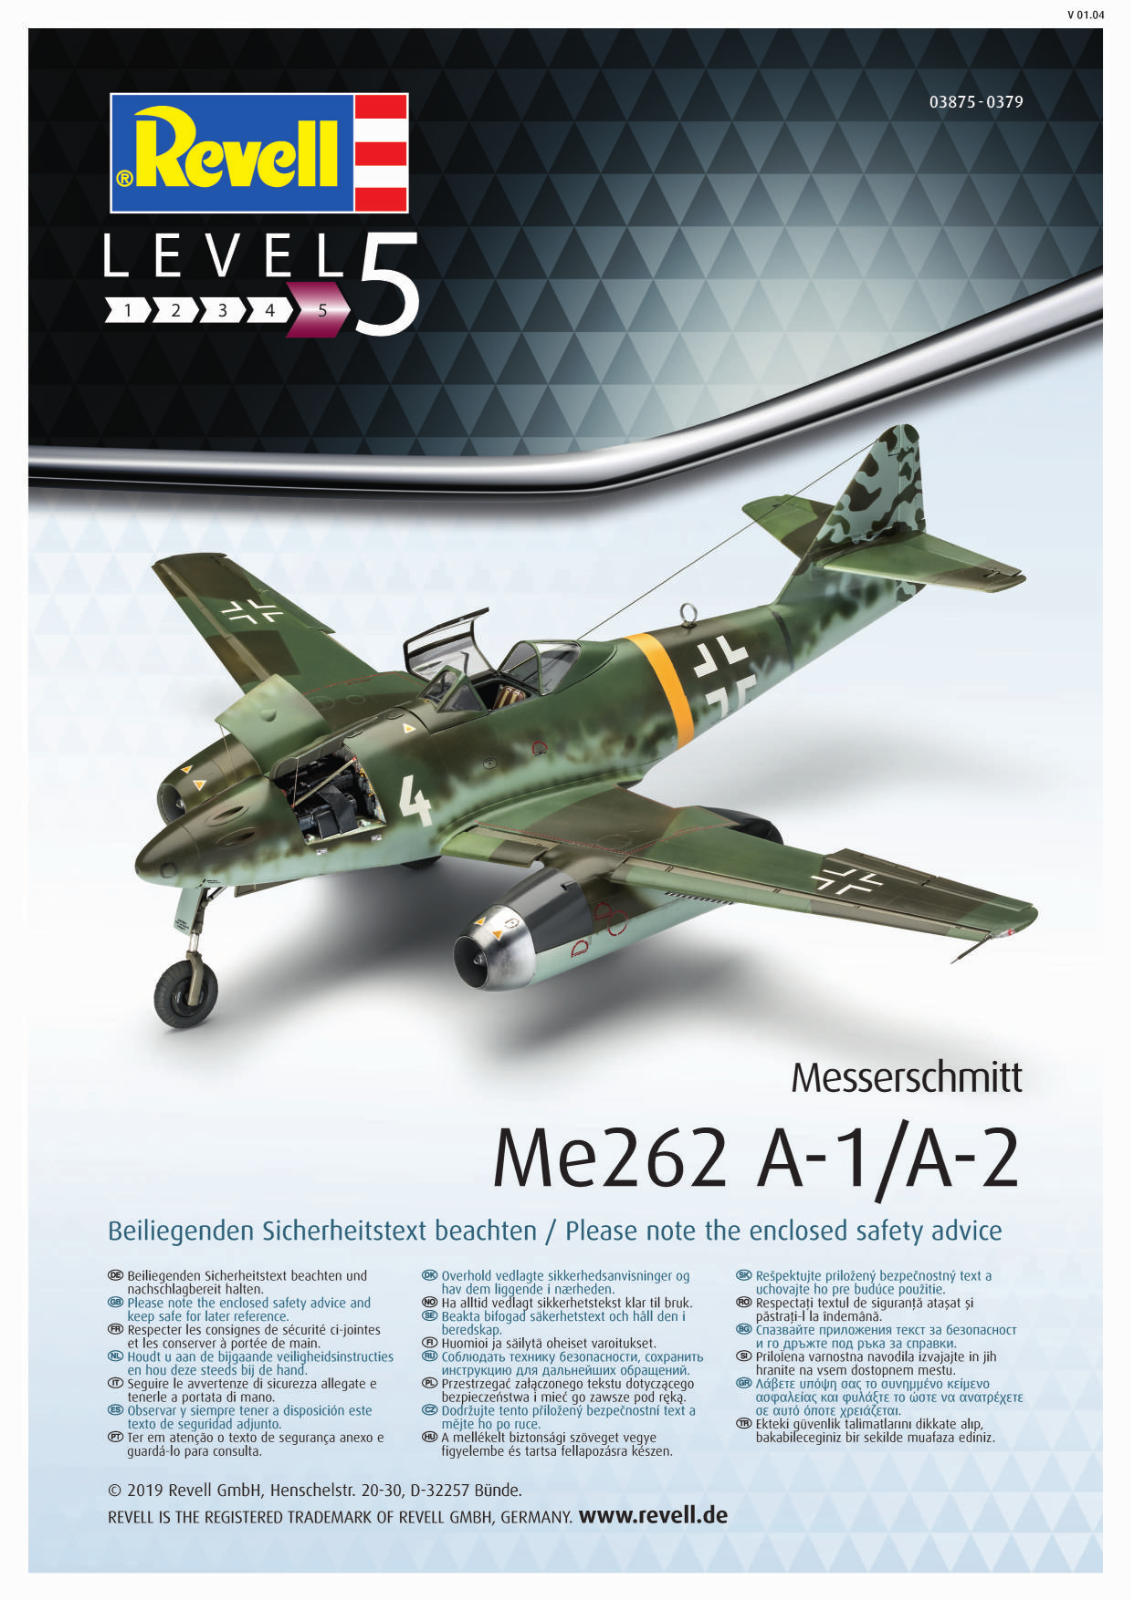 Revell Me262 A-1 Service Manual